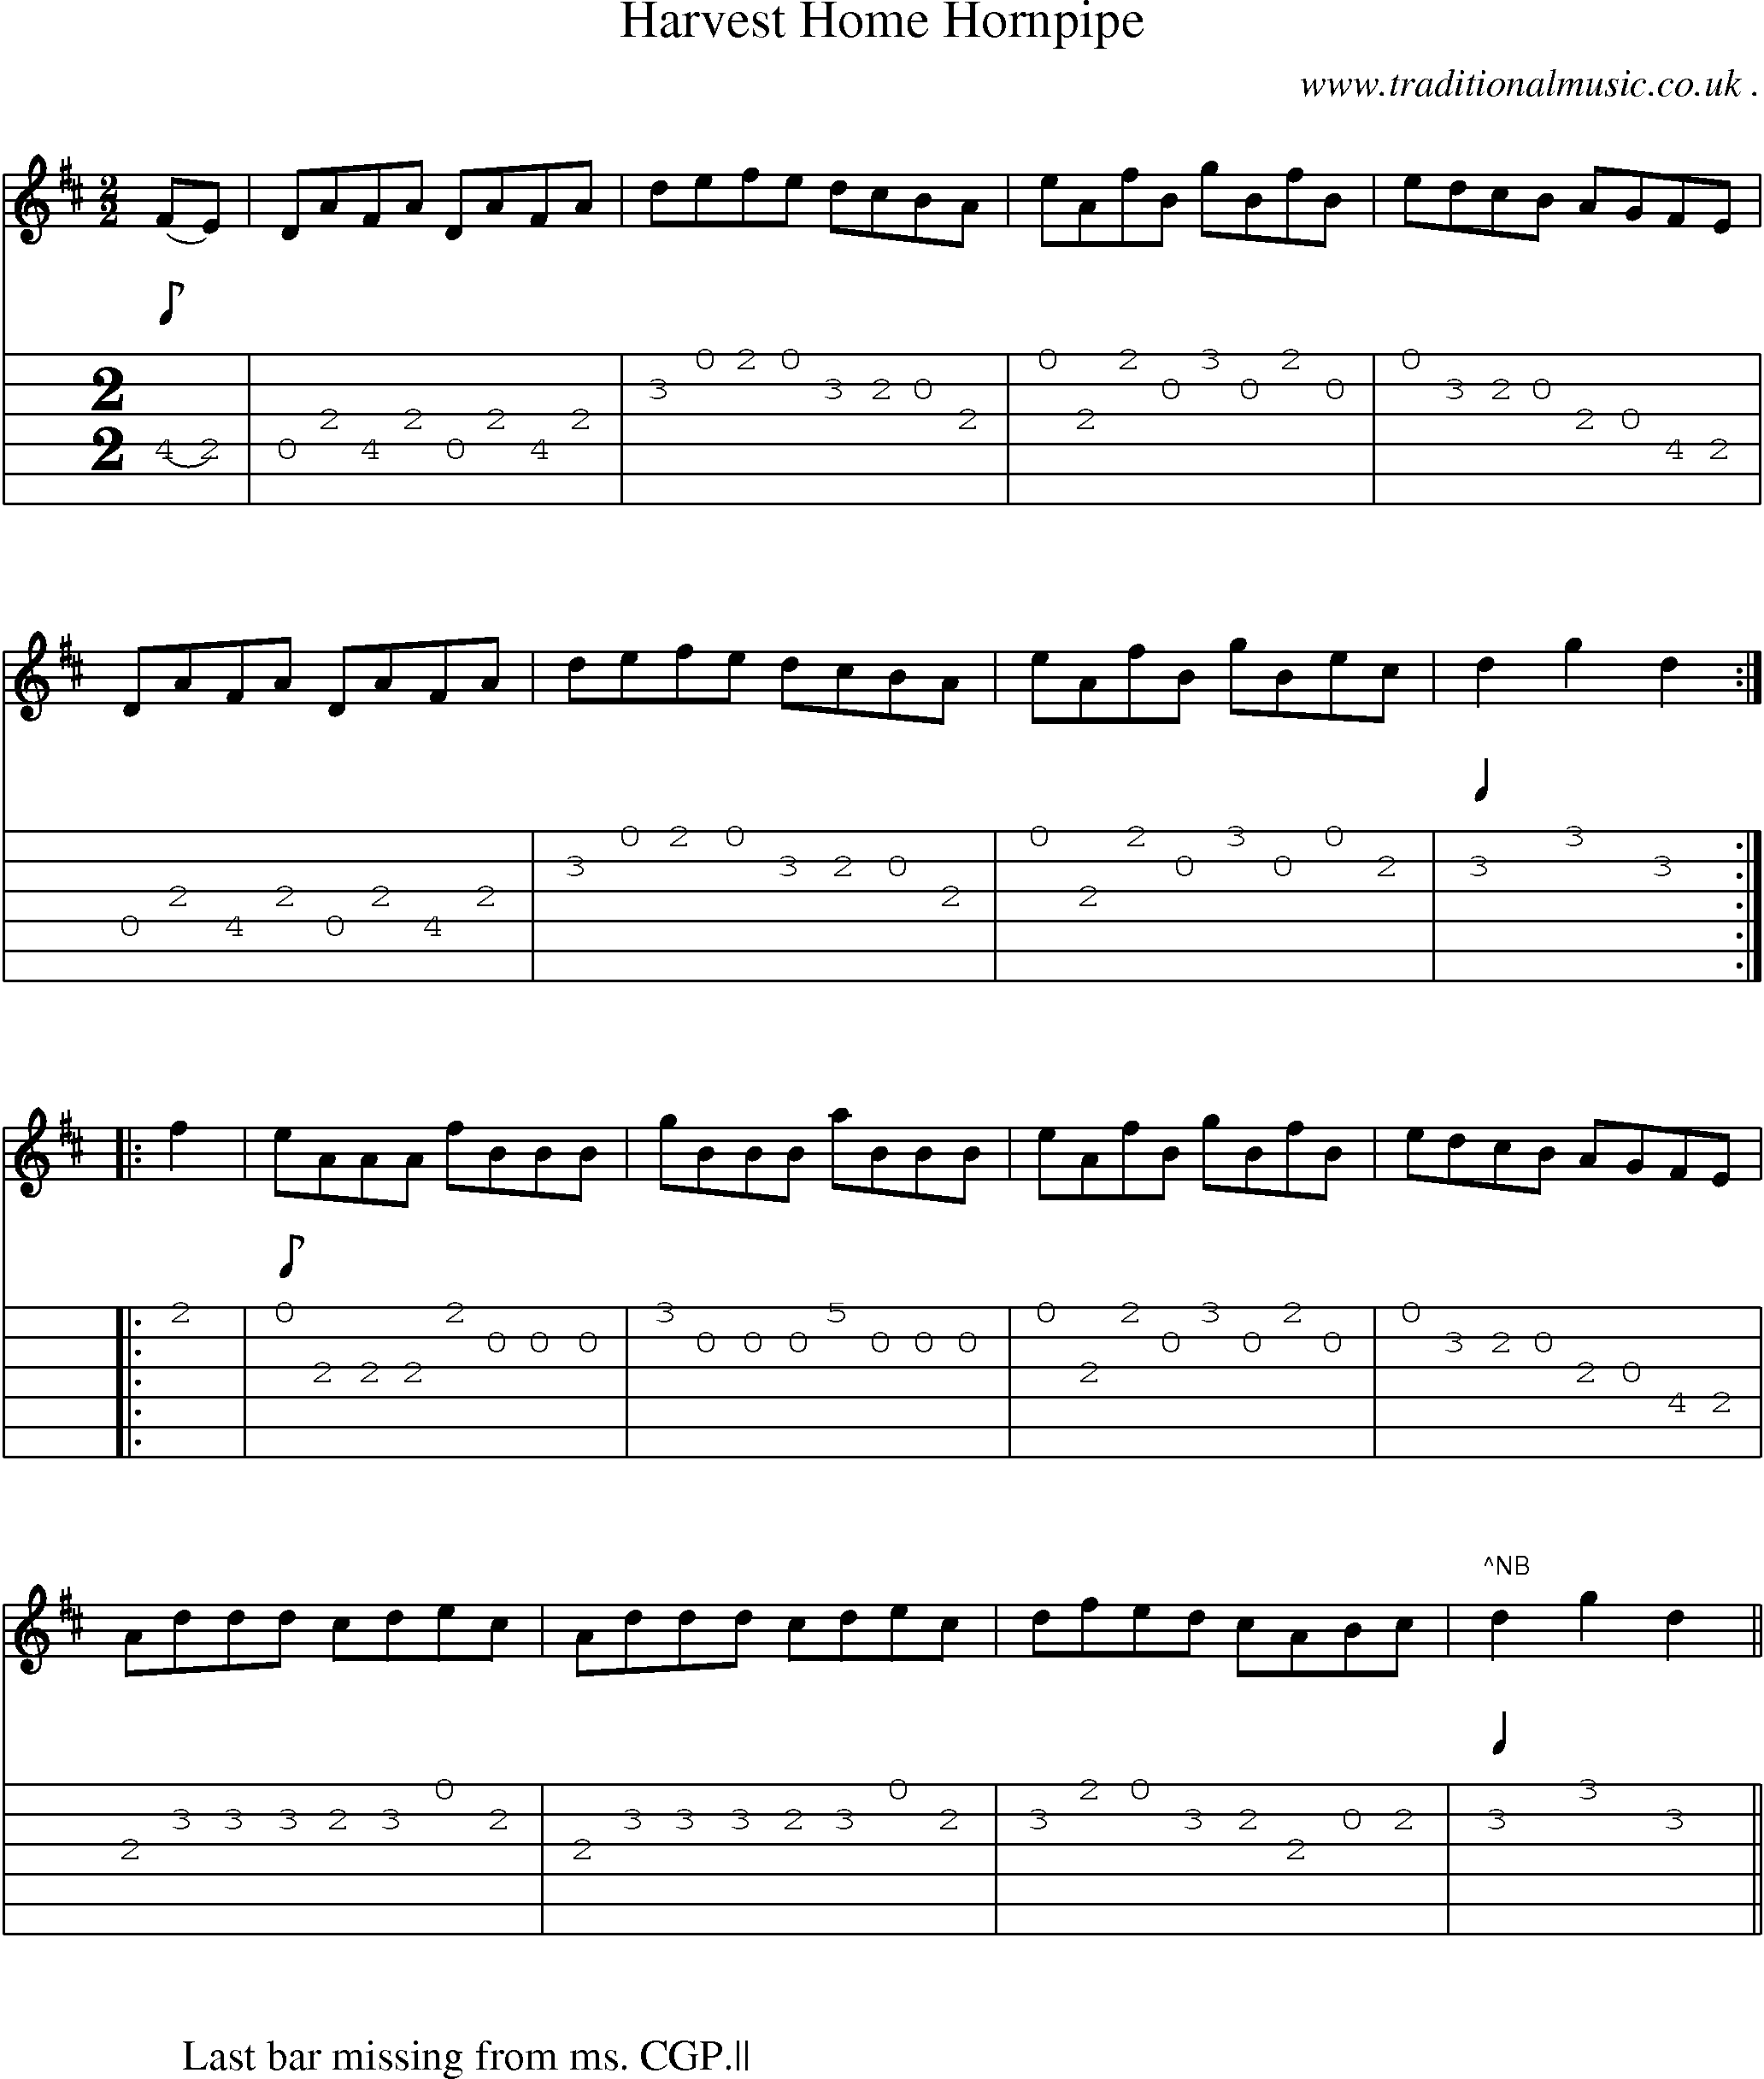 Sheet-Music and Guitar Tabs for Harvest Home Hornpipe